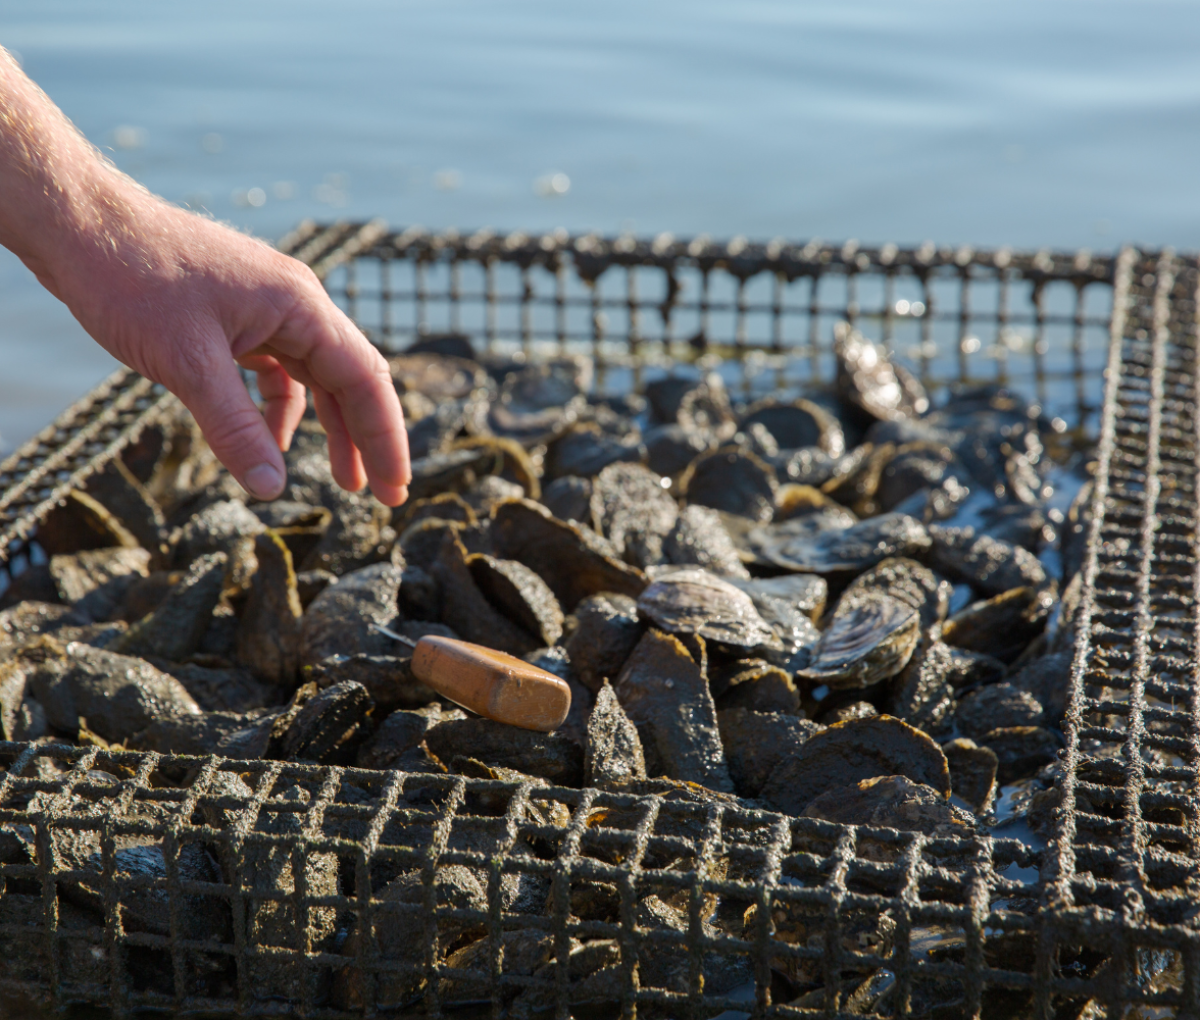 Picking oysters at Pleasure House Oyster Farm, Virginia Beach, USA.